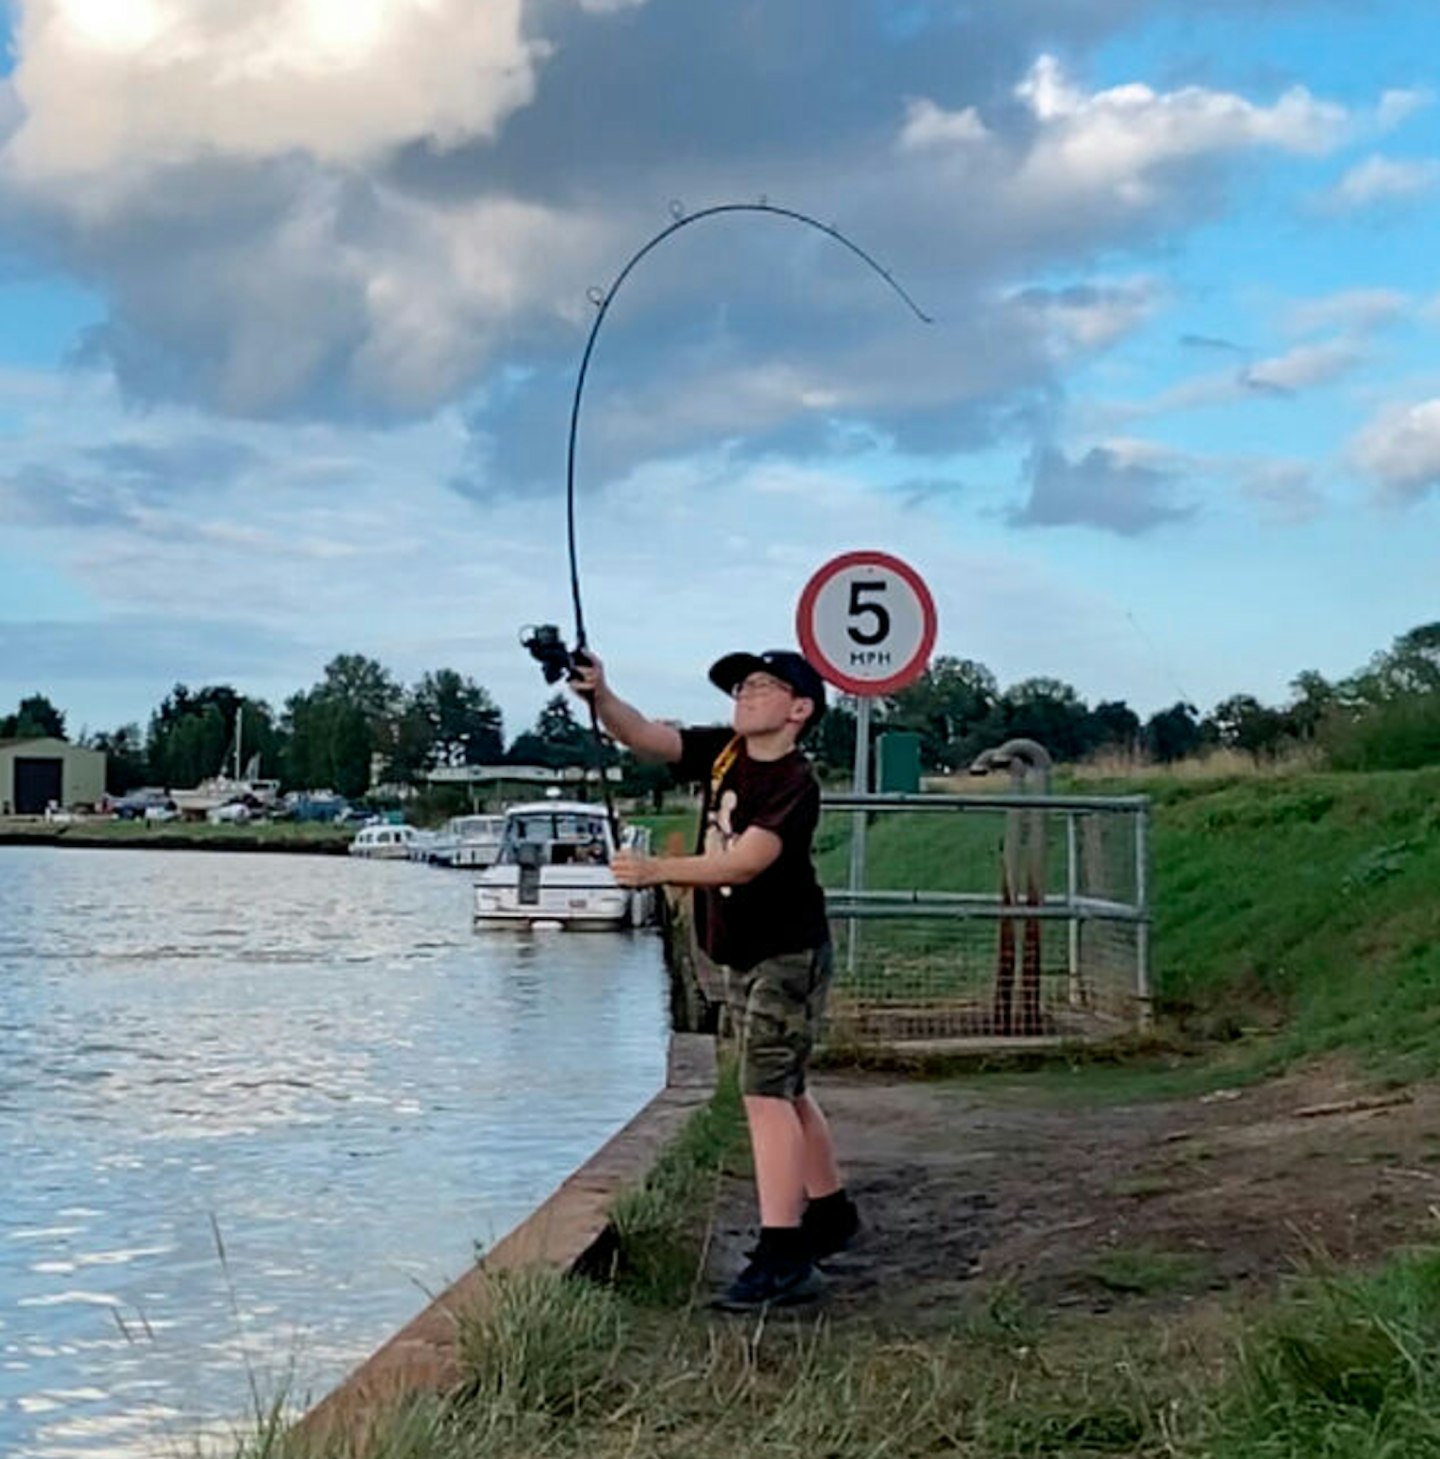 Rowan Barrington (10) cast an almighty 36,960 yards over a series of sponsored sessions in a bid to raise awareness and cash for the Carp4Kids